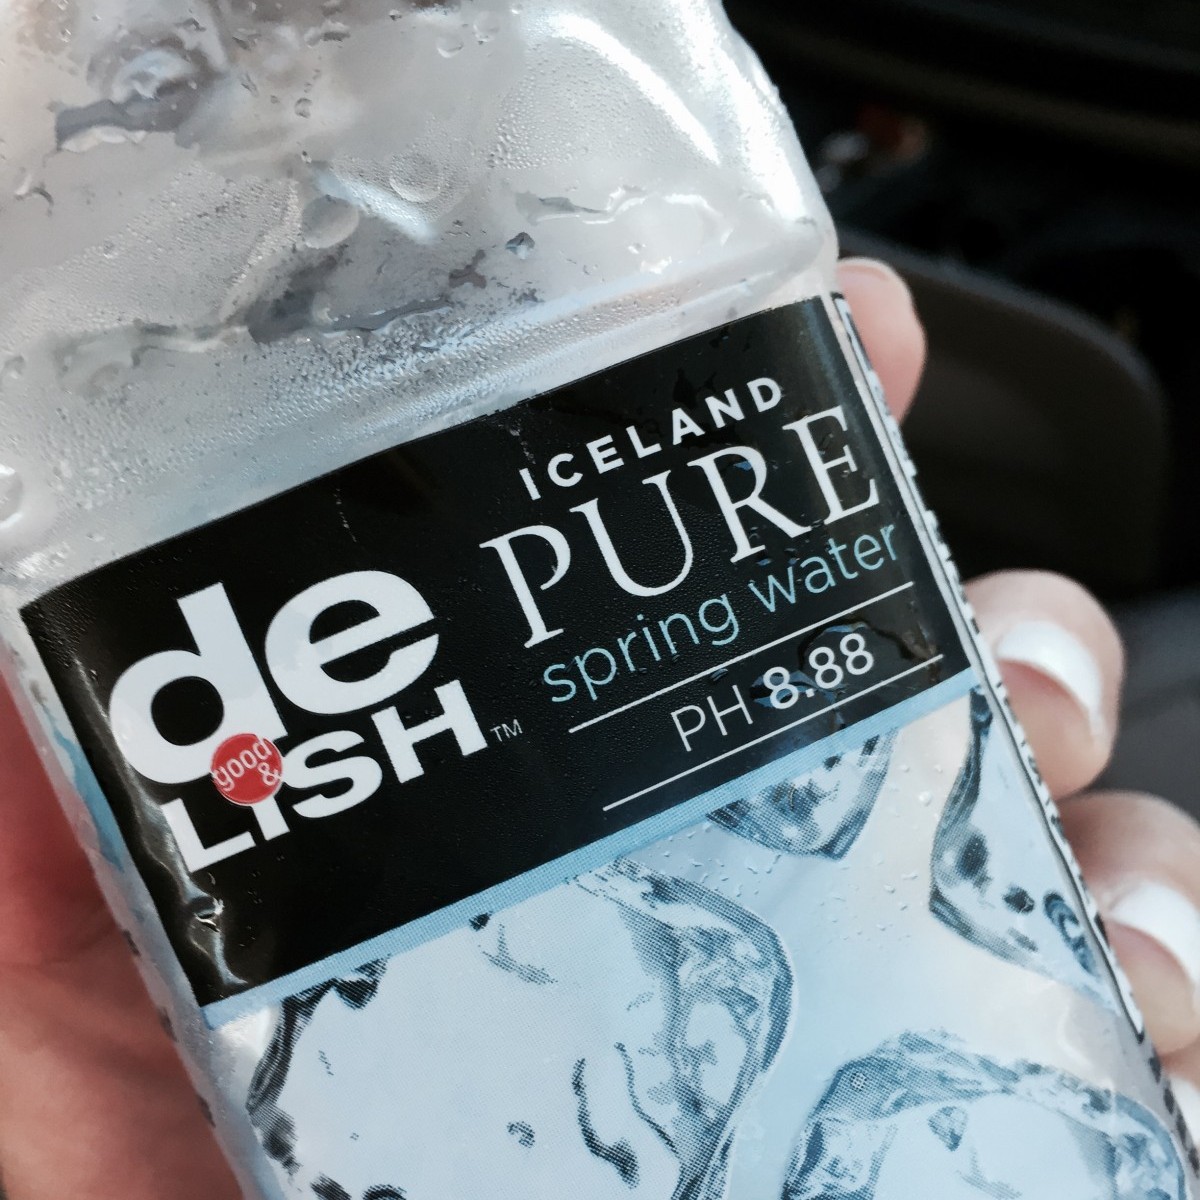 A bottle of Icelandic Spring Water teaches a lesson on mindfulness.